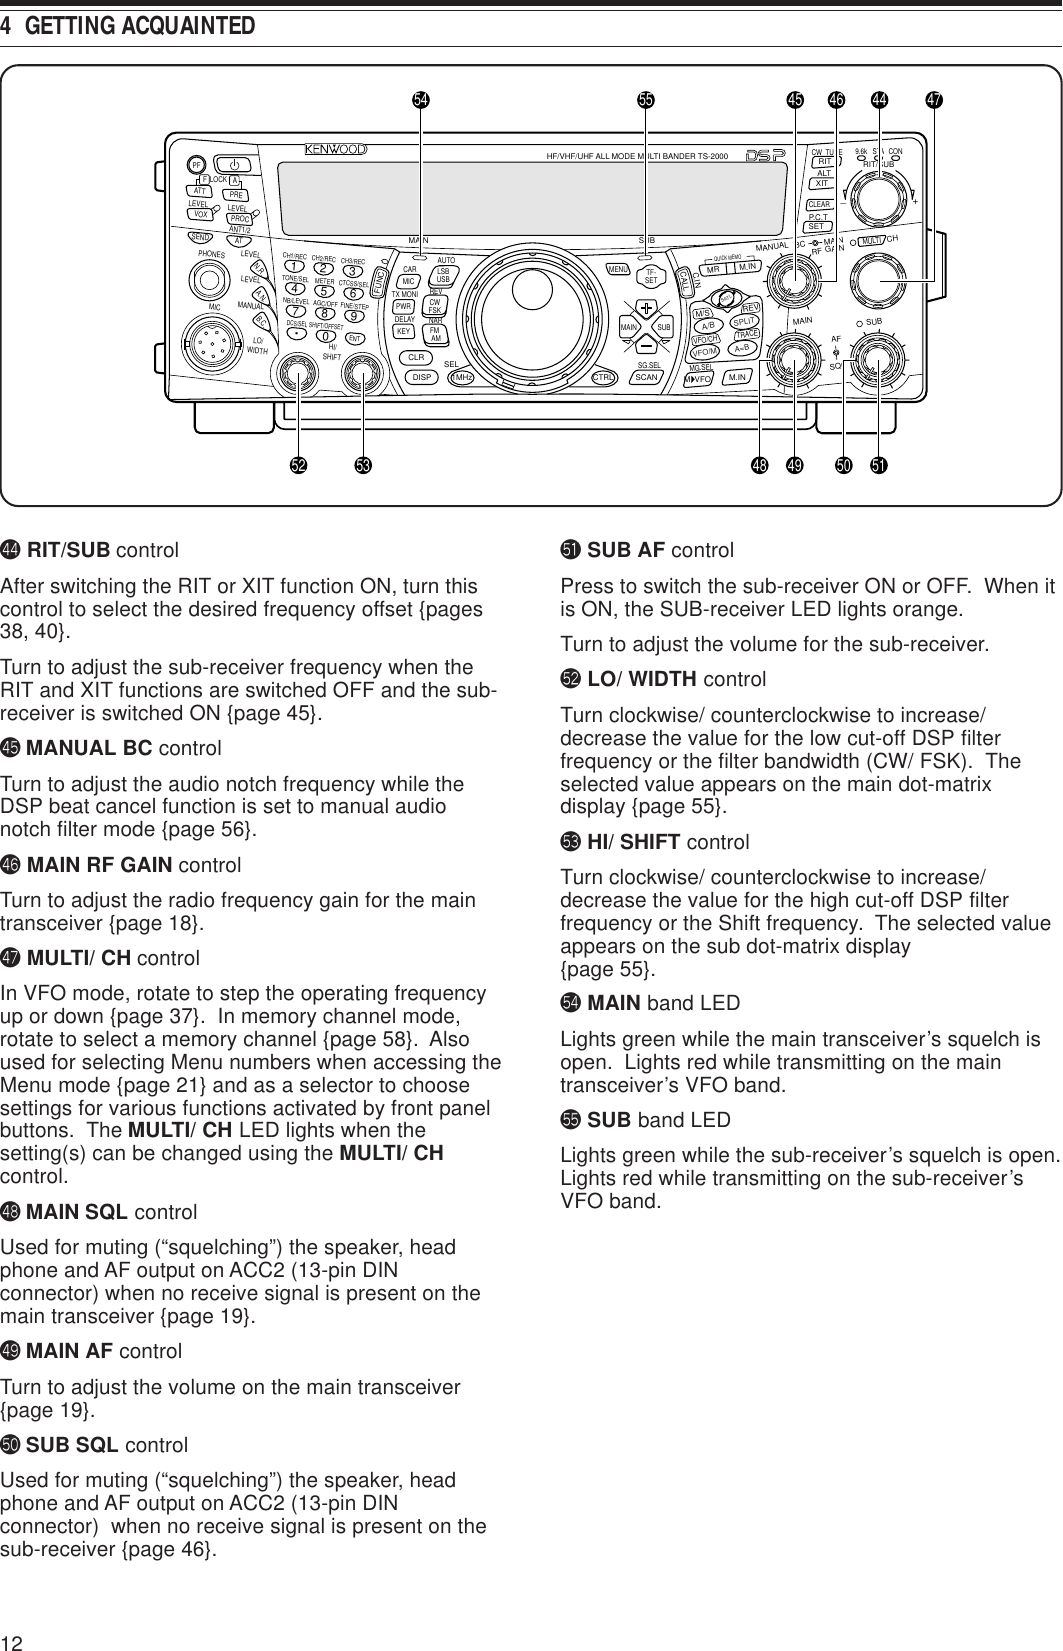 124  GETTING ACQUAINTED$4 RIT/SUB controlAfter switching the RIT or XIT function ON, turn thiscontrol to select the desired frequency offset {pages38, 40}.Turn to adjust the sub-receiver frequency when theRIT and XIT functions are switched OFF and the sub-receiver is switched ON {page 45}.$5 MANUAL BC controlTurn to adjust the audio notch frequency while theDSP beat cancel function is set to manual audionotch filter mode {page 56}.$6 MAIN RF GAIN controlTurn to adjust the radio frequency gain for the maintransceiver {page 18}.$7 MULTI/ CH controlIn VFO mode, rotate to step the operating frequencyup or down {page 37}.  In memory channel mode,rotate to select a memory channel {page 58}.  Alsoused for selecting Menu numbers when accessing theMenu mode {page 21} and as a selector to choosesettings for various functions activated by front panelbuttons.  The MULTI/ CH LED lights when thesetting(s) can be changed using the MULTI/ CHcontrol.$8 MAIN SQL controlUsed for muting (“squelching”) the speaker, headphone and AF output on ACC2 (13-pin DINconnector) when no receive signal is present on themain transceiver {page 19}.$9 MAIN AF controlTurn to adjust the volume on the main transceiver{page 19}.%0 SUB SQL controlUsed for muting (“squelching”) the speaker, headphone and AF output on ACC2 (13-pin DINconnector)  when no receive signal is present on thesub-receiver {page 46}.%1 SUB AF controlPress to switch the sub-receiver ON or OFF.  When itis ON, the SUB-receiver LED lights orange.Turn to adjust the volume for the sub-receiver.%2 LO/ WIDTH controlTurn clockwise/ counterclockwise to increase/decrease the value for the low cut-off DSP filterfrequency or the filter bandwidth (CW/ FSK).  Theselected value appears on the main dot-matrixdisplay {page 55}.%3 HI/ SHIFT controlTurn clockwise/ counterclockwise to increase/decrease the value for the high cut-off DSP filterfrequency or the Shift frequency.  The selected valueappears on the sub dot-matrix display{page 55}.%4 MAIN band LEDLights green while the main transceiver’s squelch isopen.  Lights red while transmitting on the maintransceiver’s VFO band.%5 SUB band LEDLights green while the sub-receiver’s squelch is open.Lights red while transmitting on the sub-receiver’sVFO band.PFF LOCK A1CH1/REC2CH2/REC3CH3/REC4TONE/SEL5METER6CTCSS/SEL7NB/LEVEL8AGC/OFF9FINE/STEP.DCS/SEL0SHIFT/OFFSETENTSENDPHONESMICATANT1/2PROCLEVELVOXATT PRELEVELLEVELLEVELMANUALLO/WIDTHHI/SHIFTN.R.A.N.B.C.FUNCCALLC.INCLRMAINAUTOCARTX MONIDELAY NARREVMICPWRKEYLSBUSBCWFSKFM  AMSUBDISPSEL1MHz CTRLMRMG.SELM.INQUICK MEMOM/S REVTRACEMAINMANUALRFAFSQLSUBCHMULTIBC MAINGAINVFO/CHMENU TF-SETMAIN SUBSG.SELSCAN M  VFO M.INRITCW  TUNE 9.6k STARIT/SUBCONXITALTSETCLEARP.C . T_+HF/VHF/UHF ALL MODE MULTI BANDER TS-2000SATLA/BVFO/MSPLITA=B474654 55 44455352 51504948